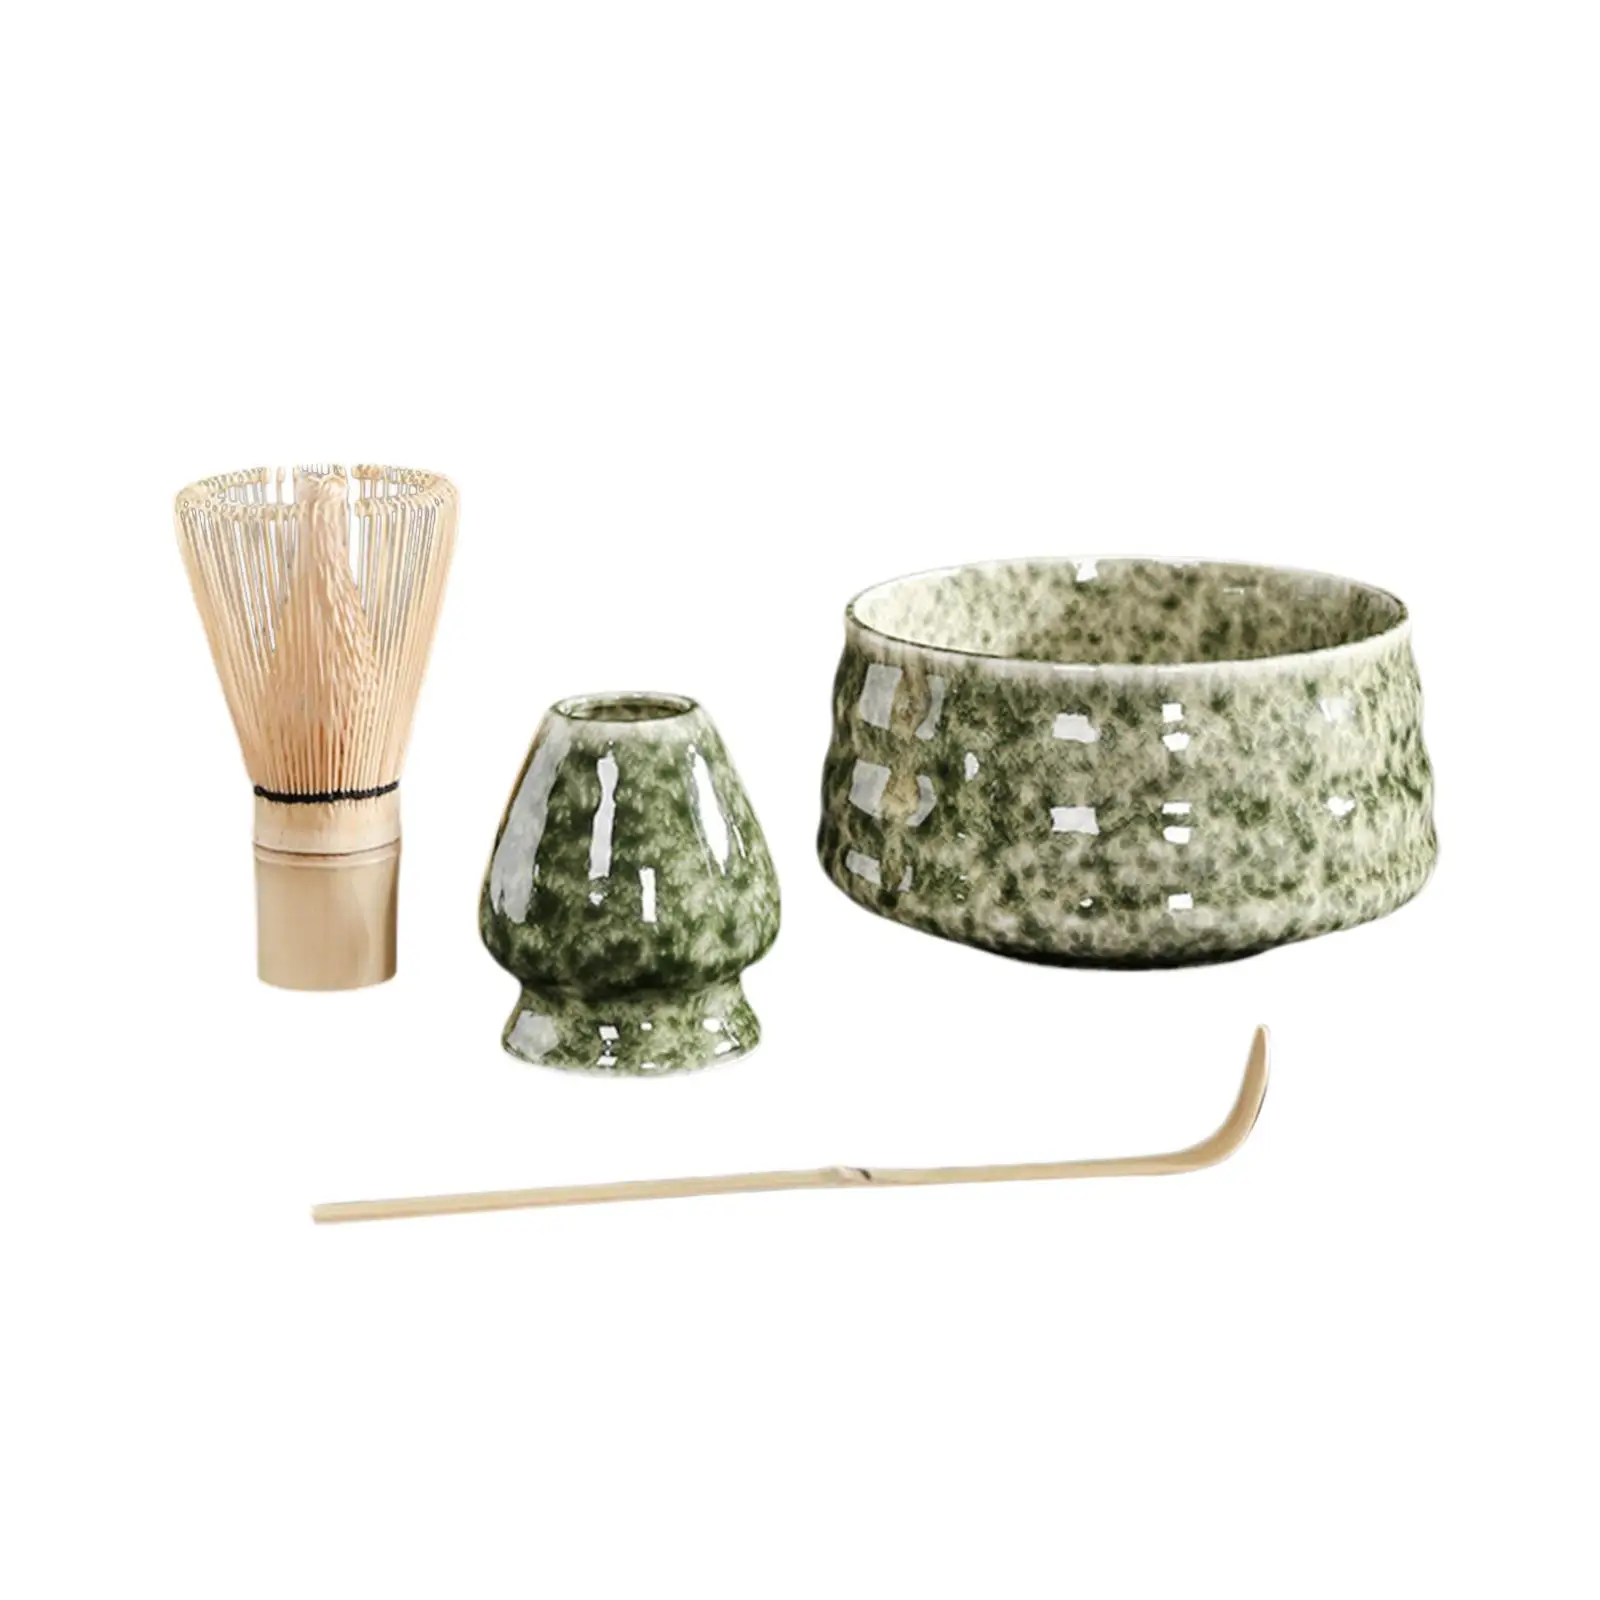 4 Pieces Japanese Matcha Whisk Set with Accessories and Tools for Friends Best Gifts